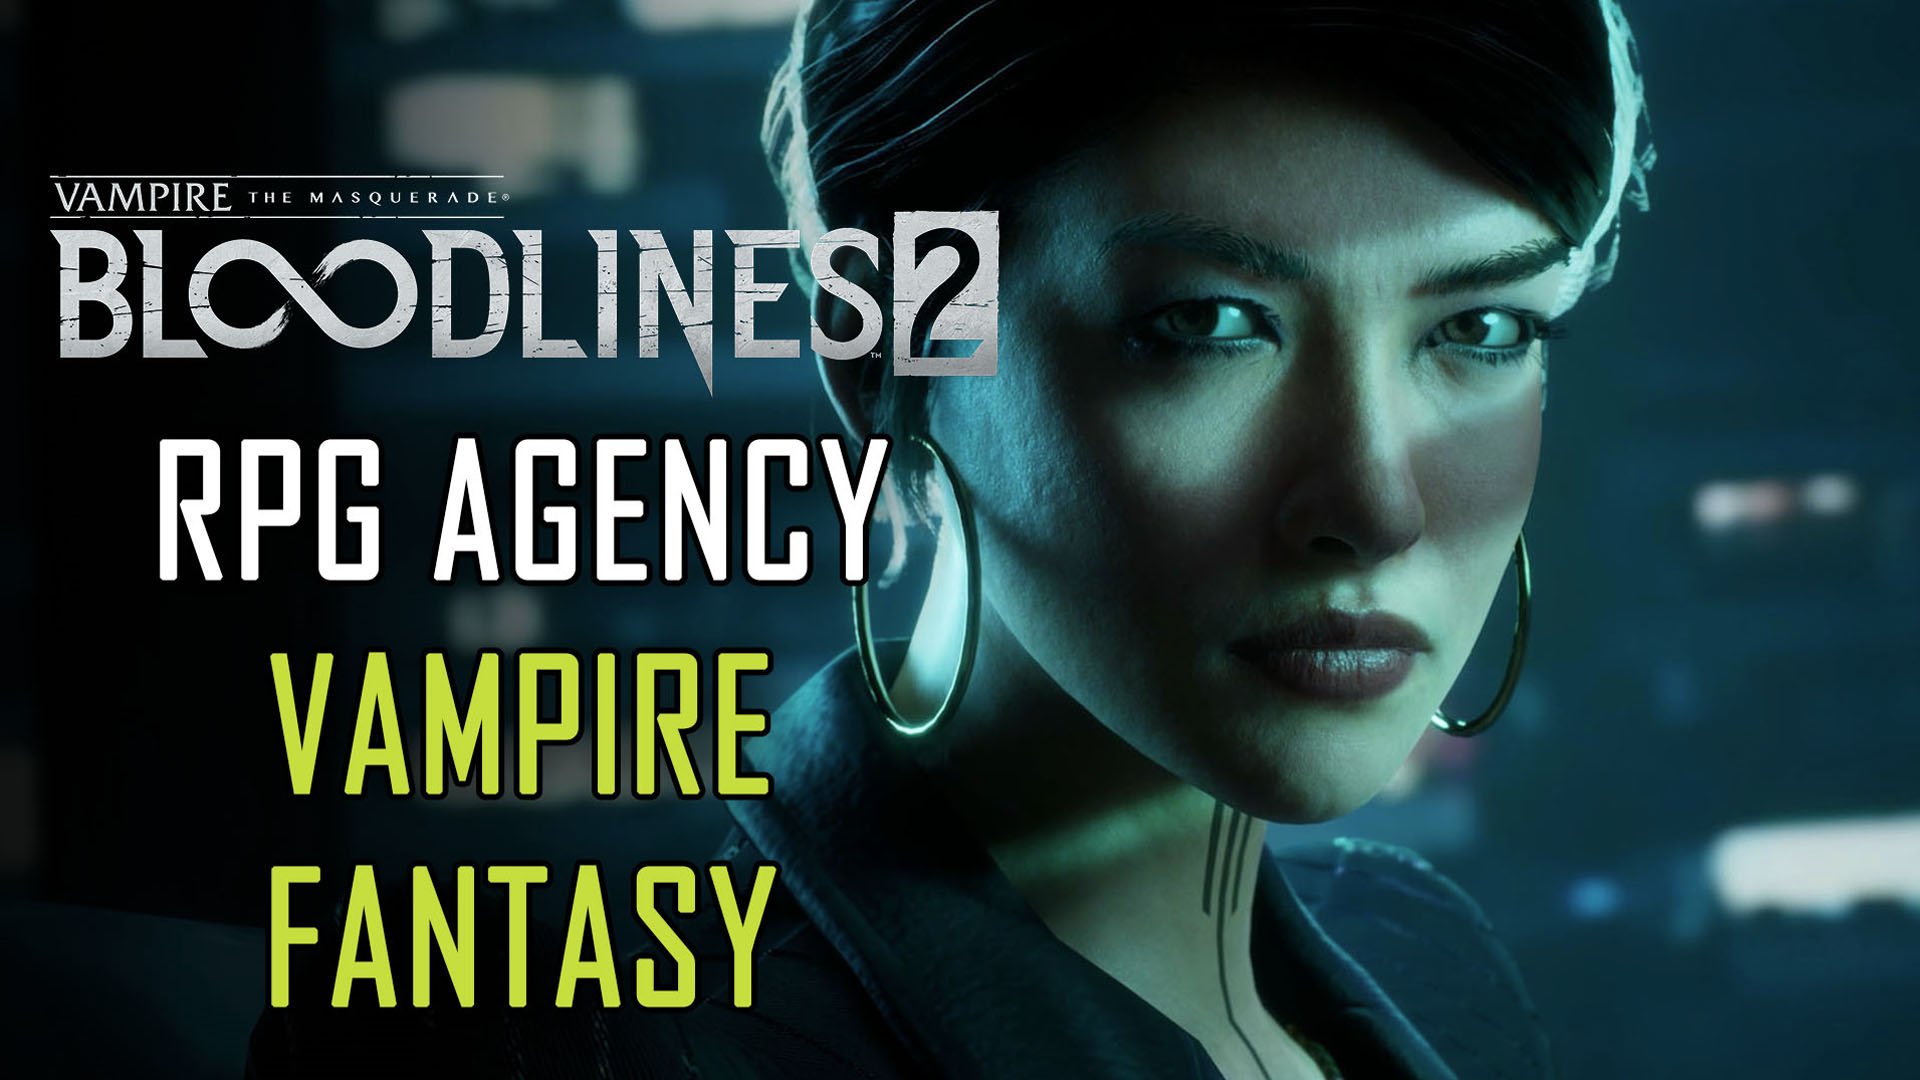 Vampire: The Masquerade – Bloodlines 2: a legendary video game